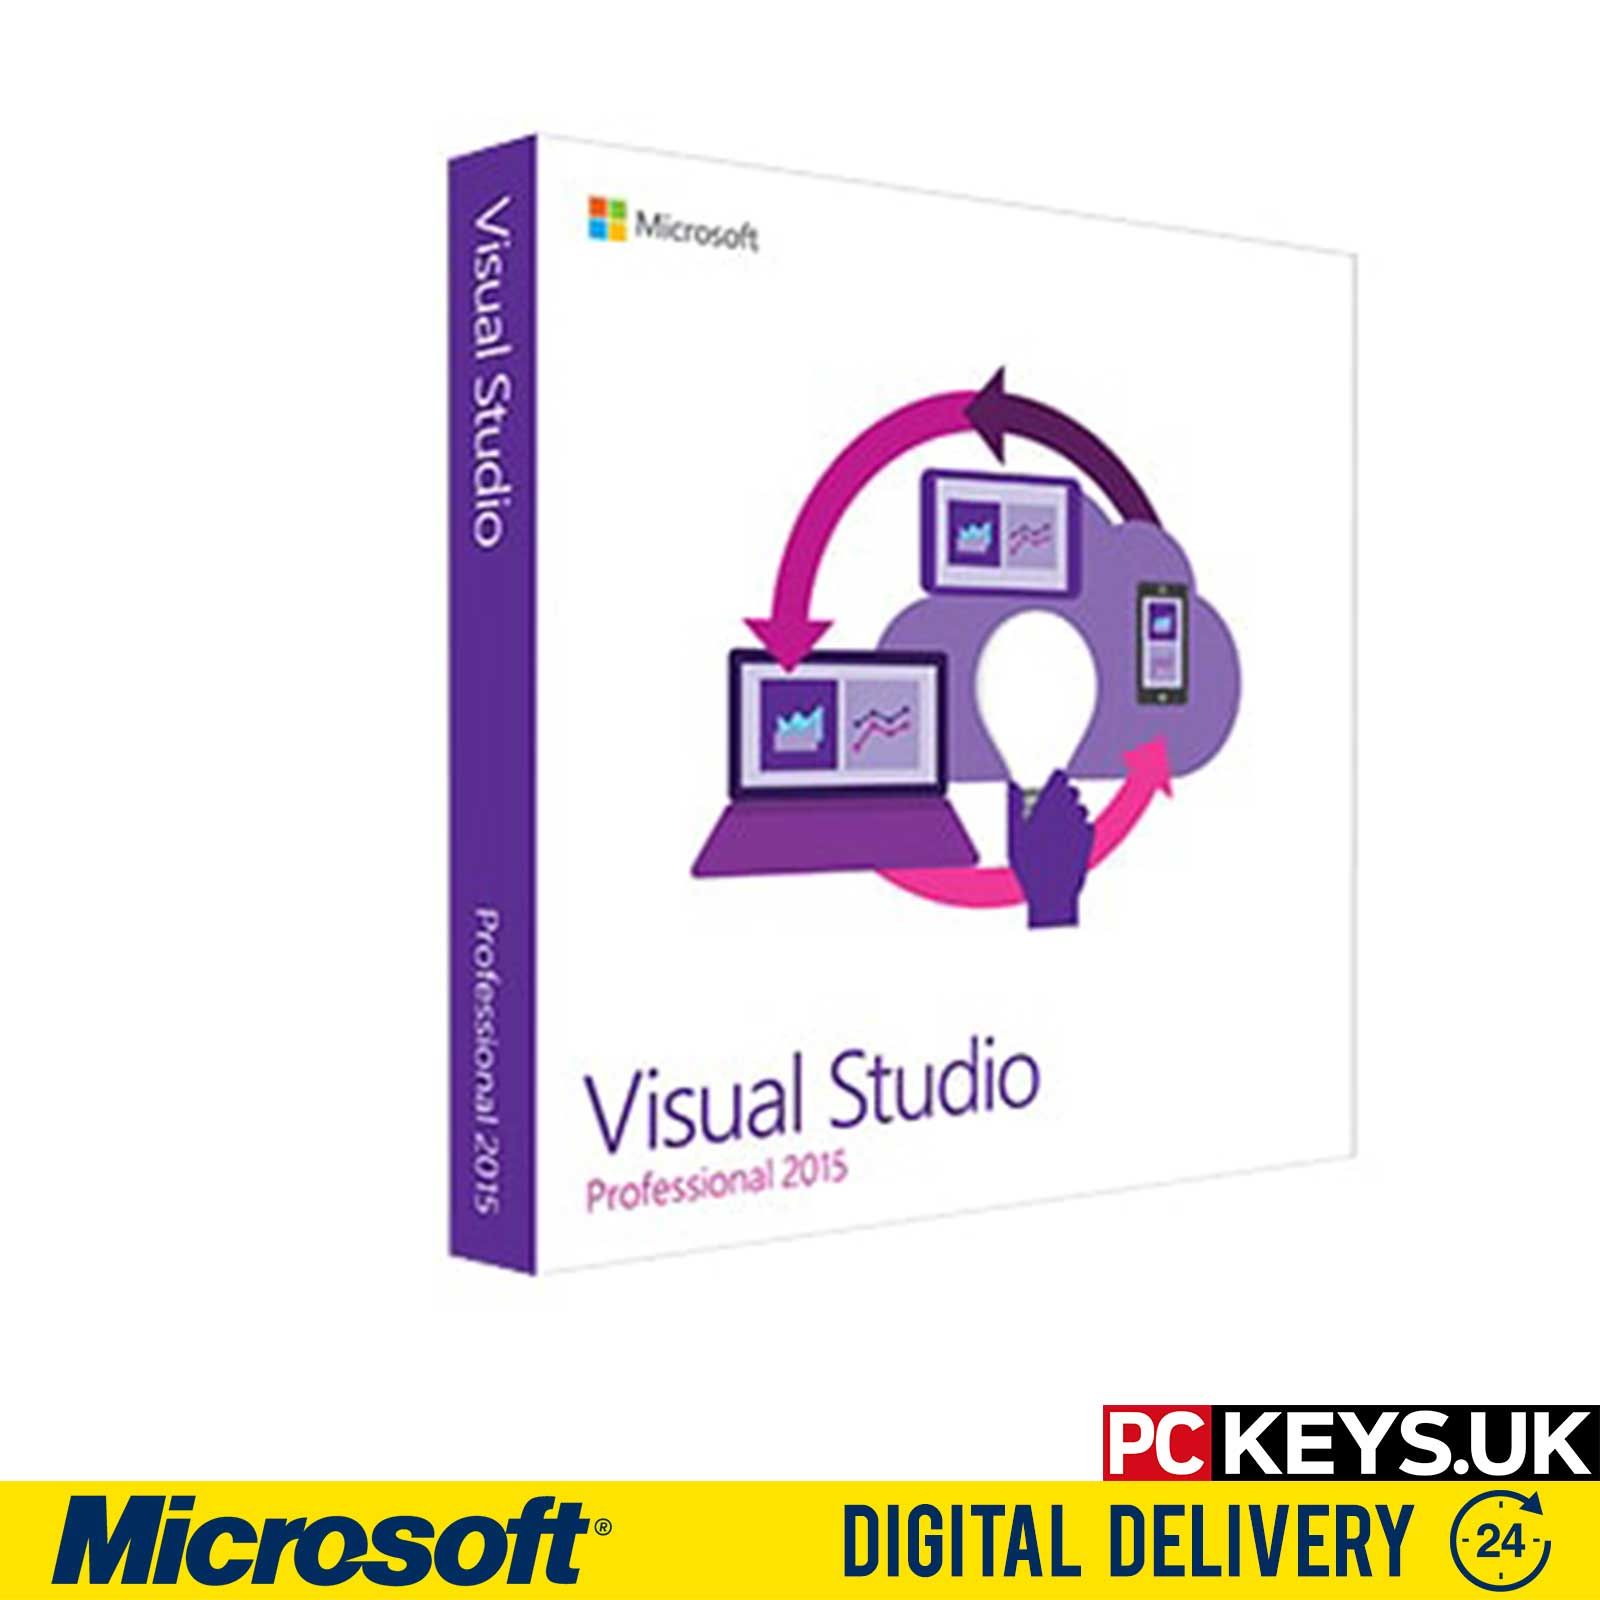 difference between visual studio professional and enterprise